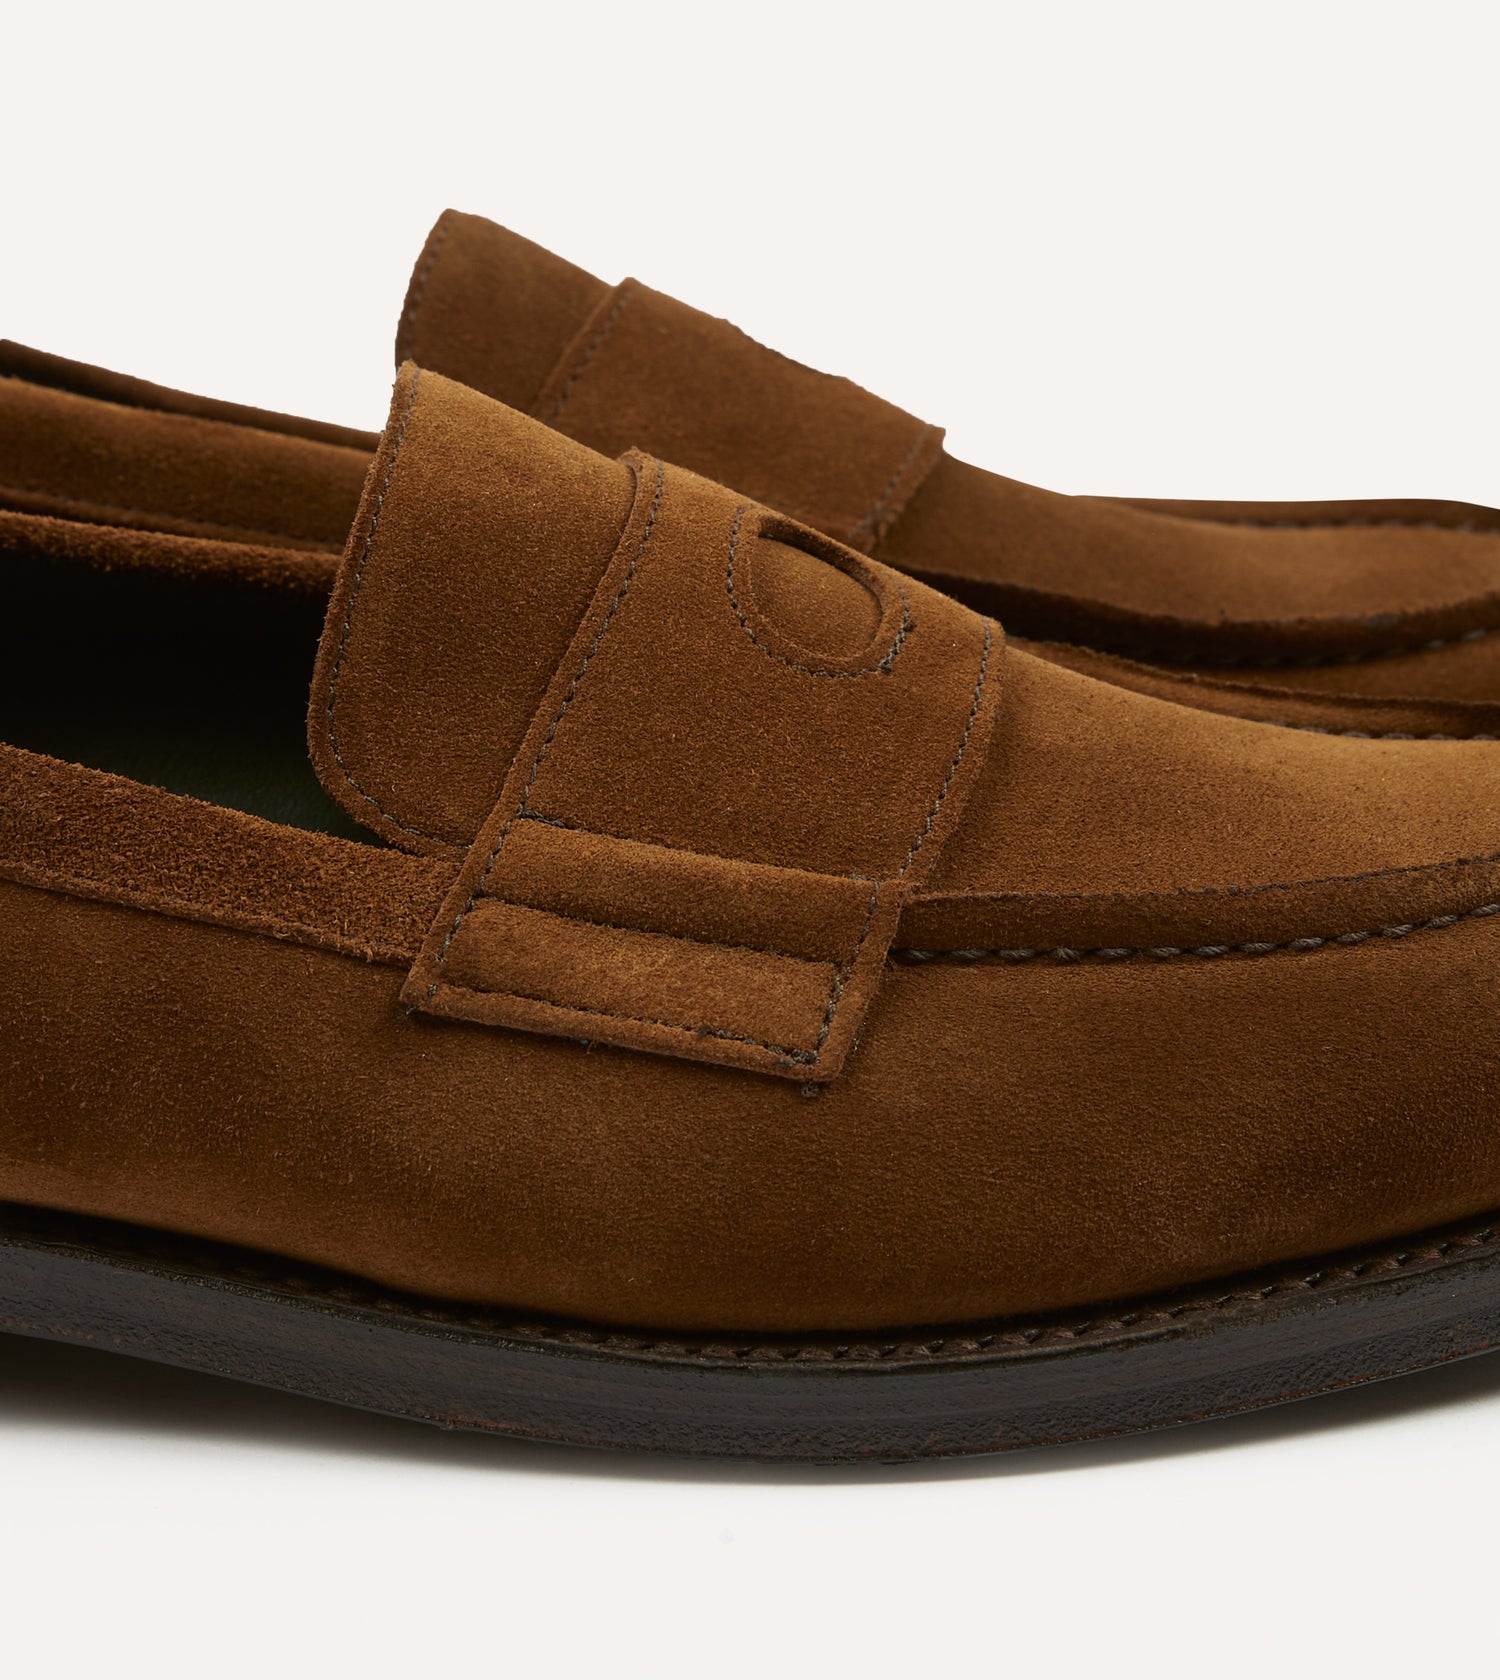 Snuff Suede Charles Goodyear Welted Penny Loafer